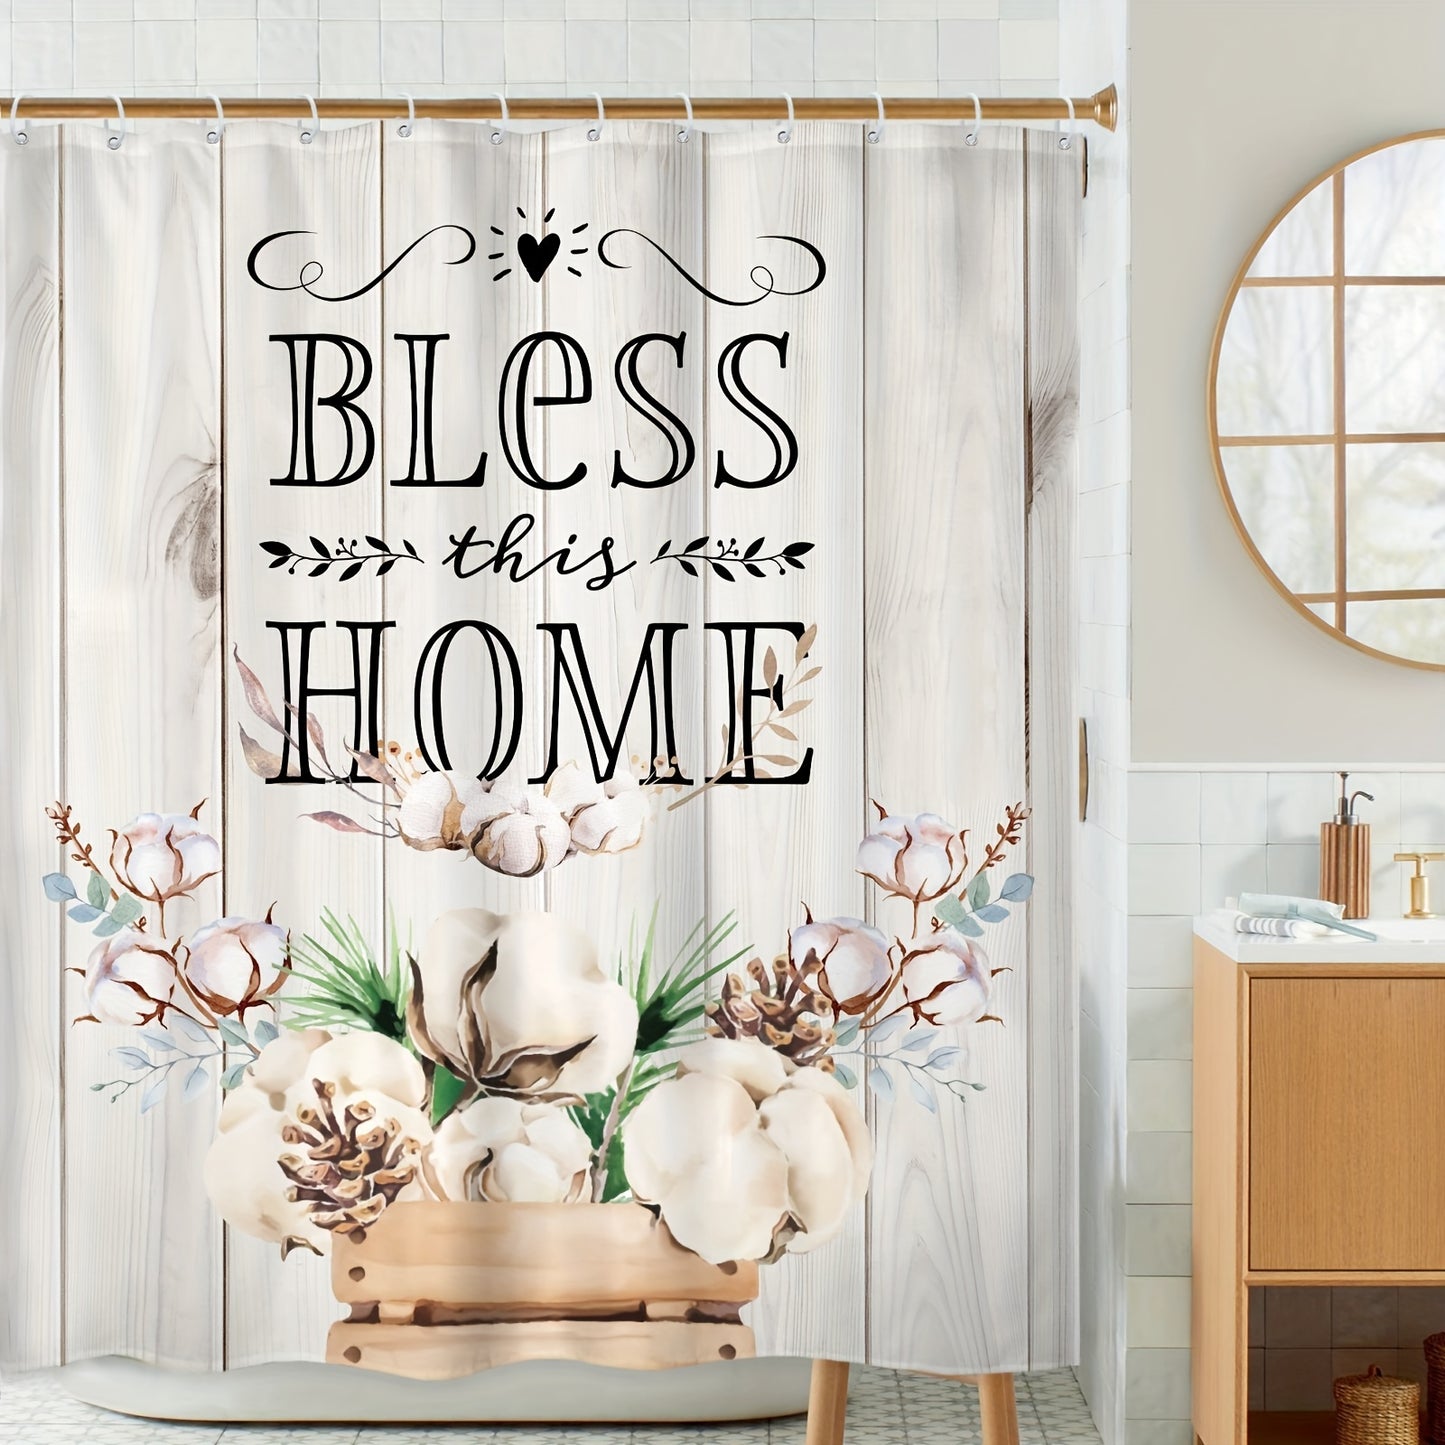 Bless This Home Christian Shower Curtain Set 72inch*72inch claimedbygoddesigns